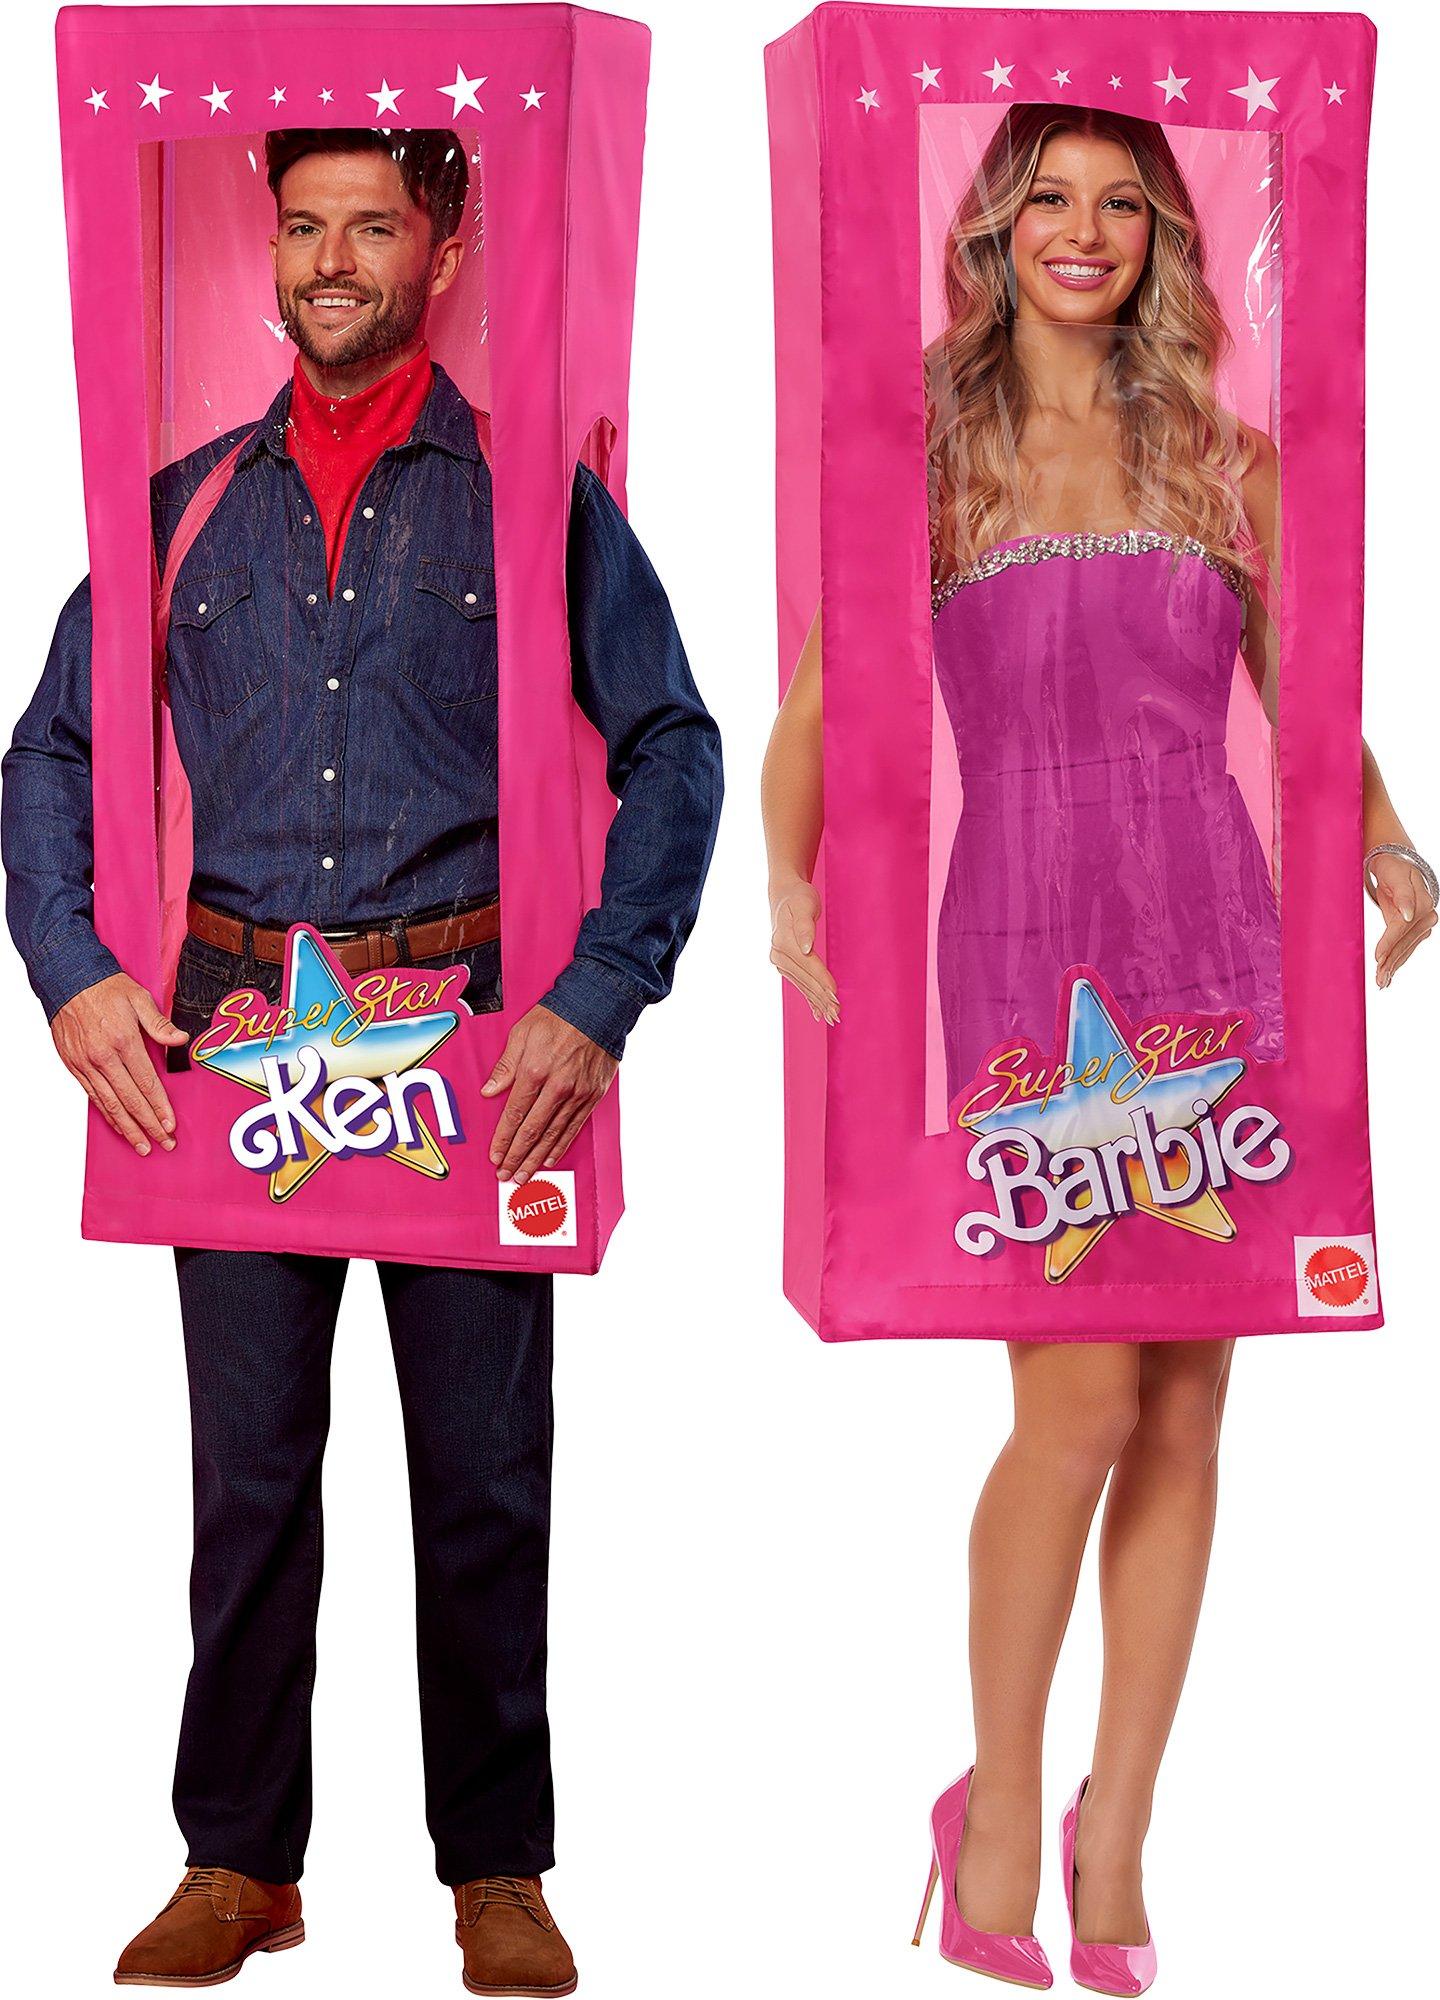 There's Still Time to Get a Ken Costume Together Before Halloween